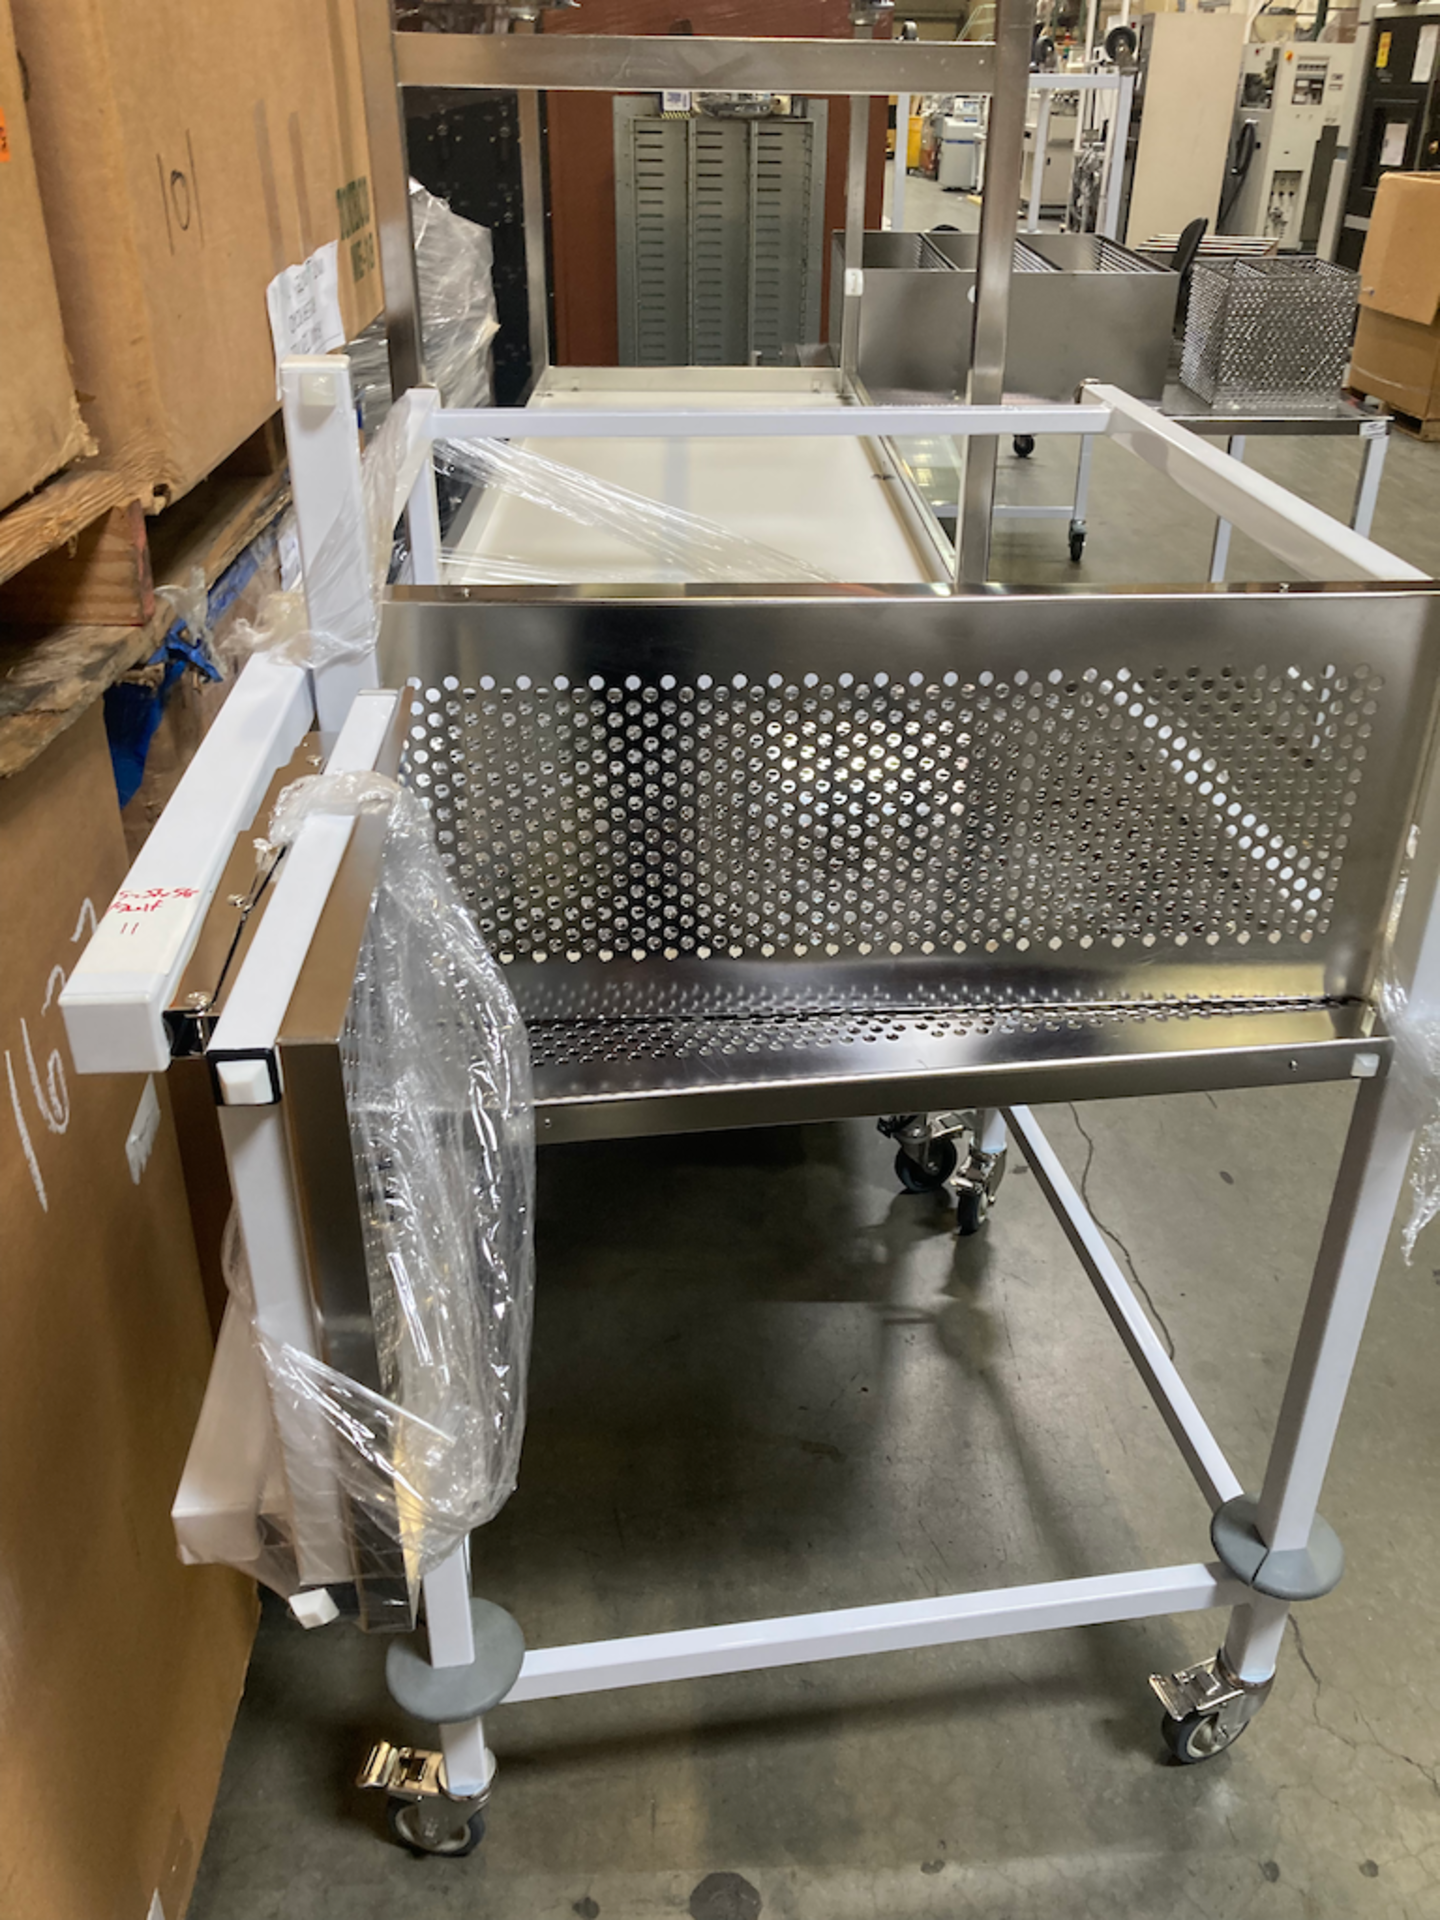 13.5 x 33 x 58 Perforated Stainless Steel Cleanroom Table Top Shelf - Image 3 of 3